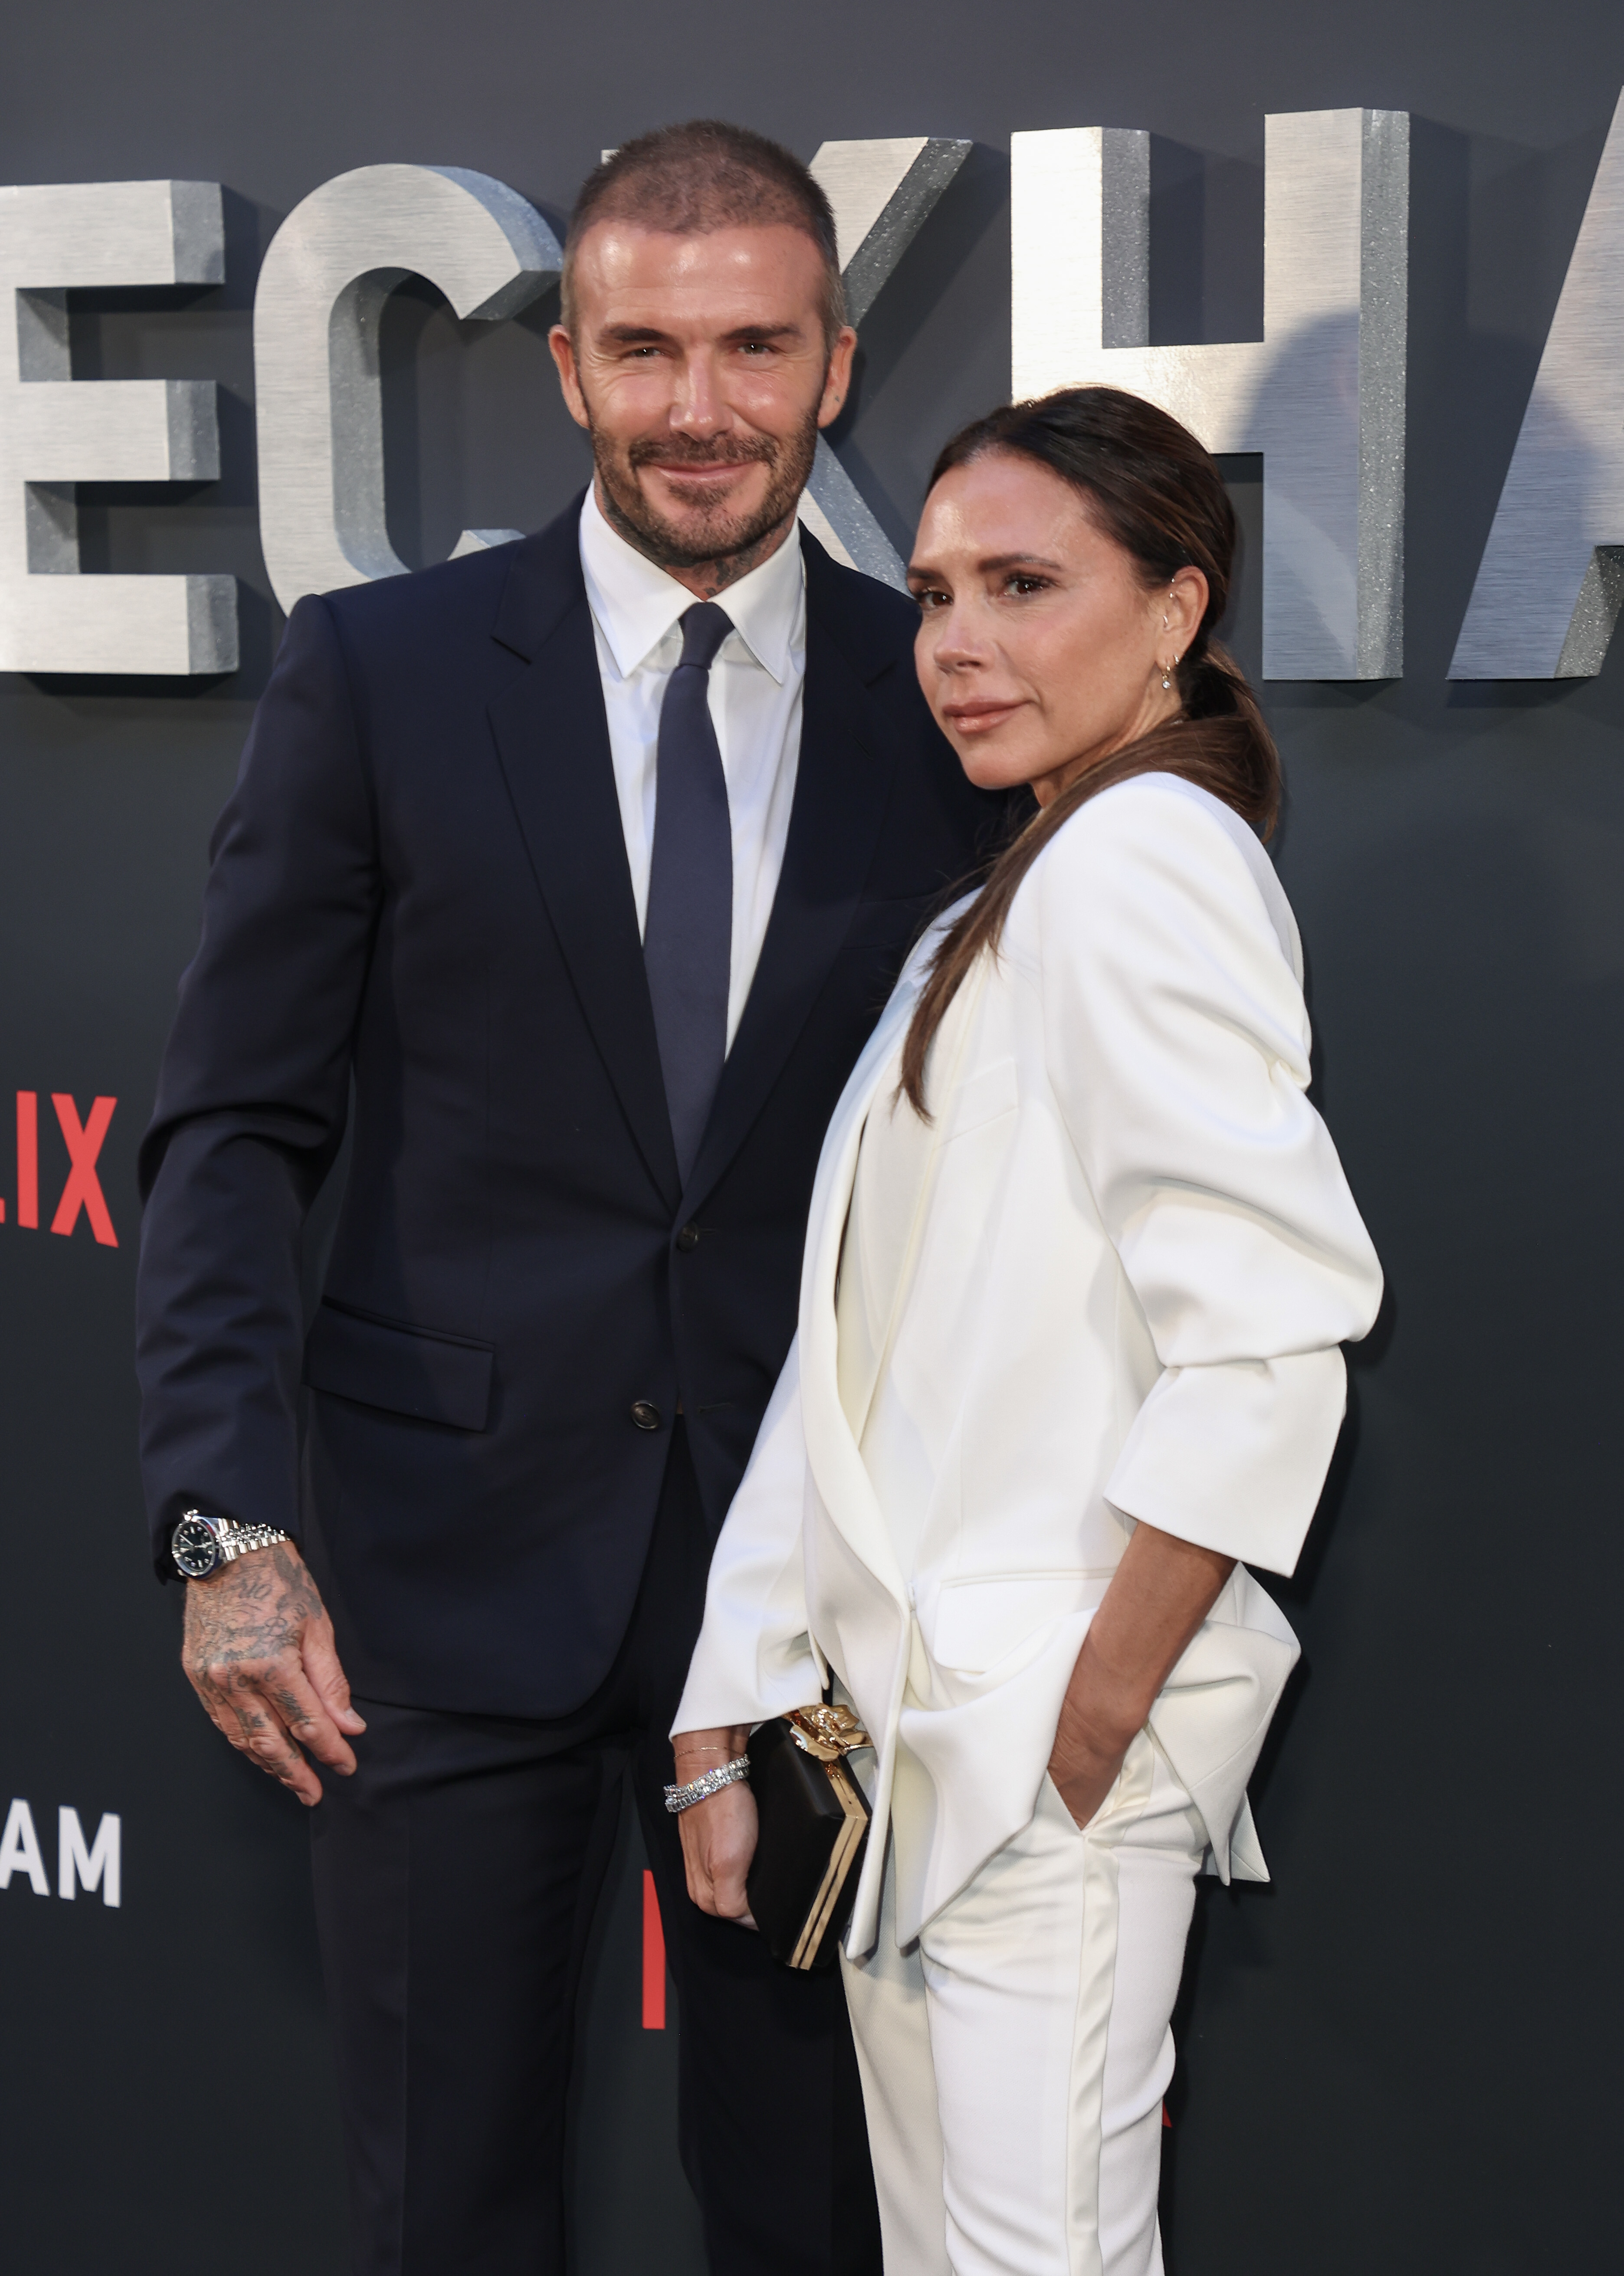 David Beckham and Victoria Beckham pose together at a media event. David is wearing a classic suit and Victoria is wearing a relaxed pantsuit